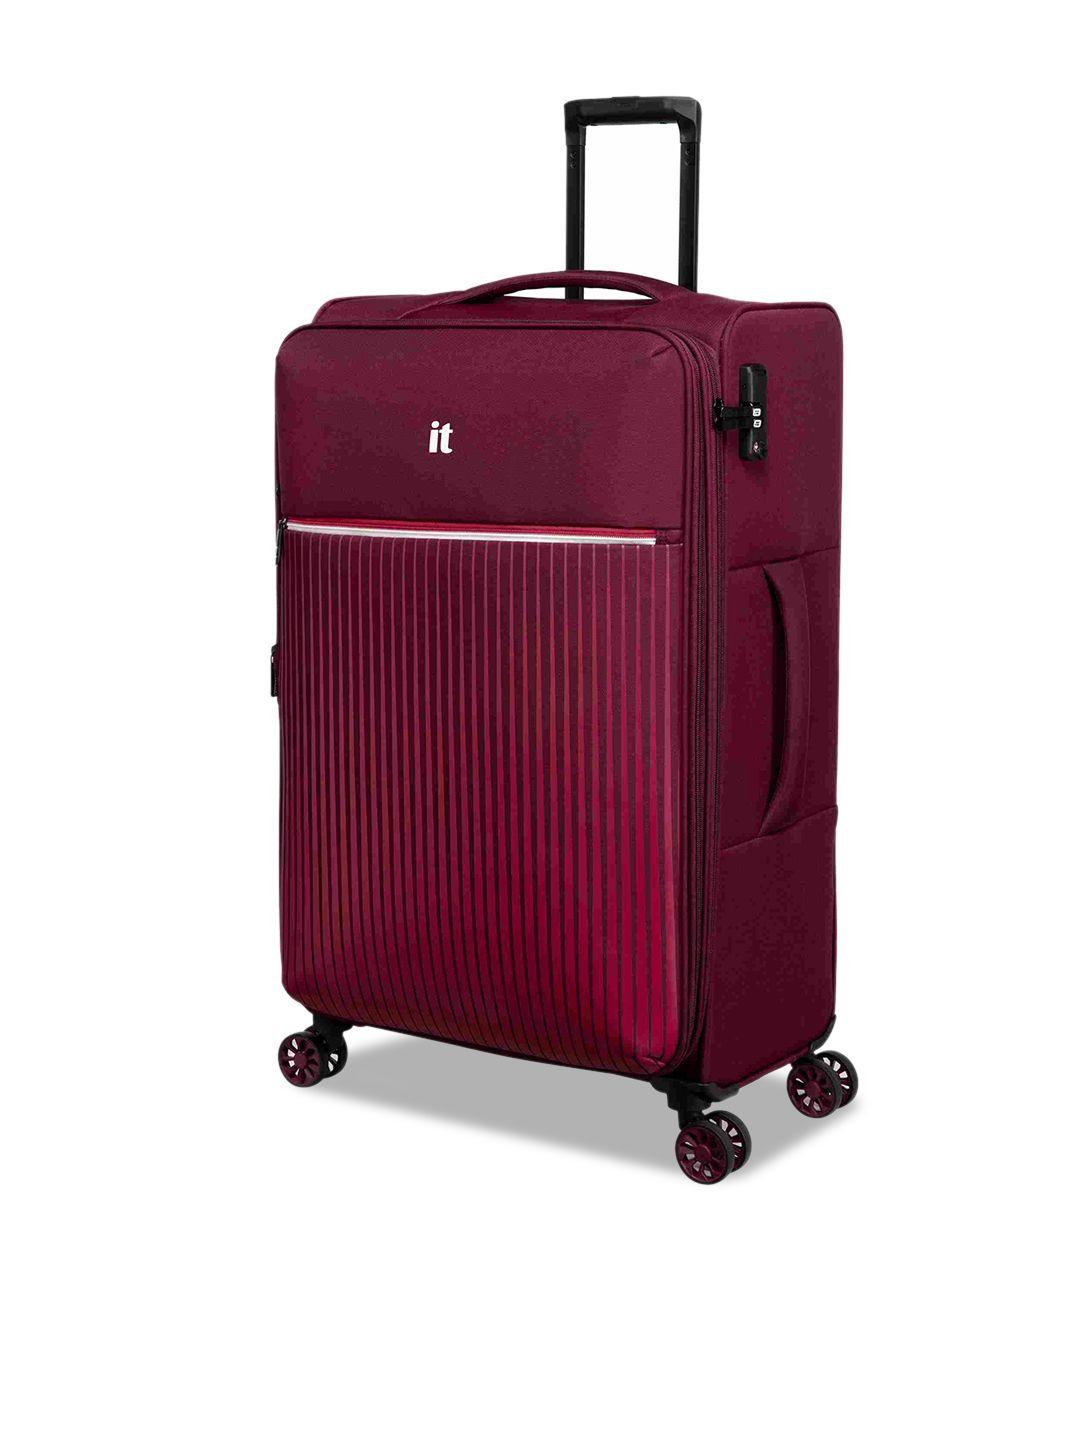 it luggage striped soft-sided large 360-degree rotation trolley suitcase